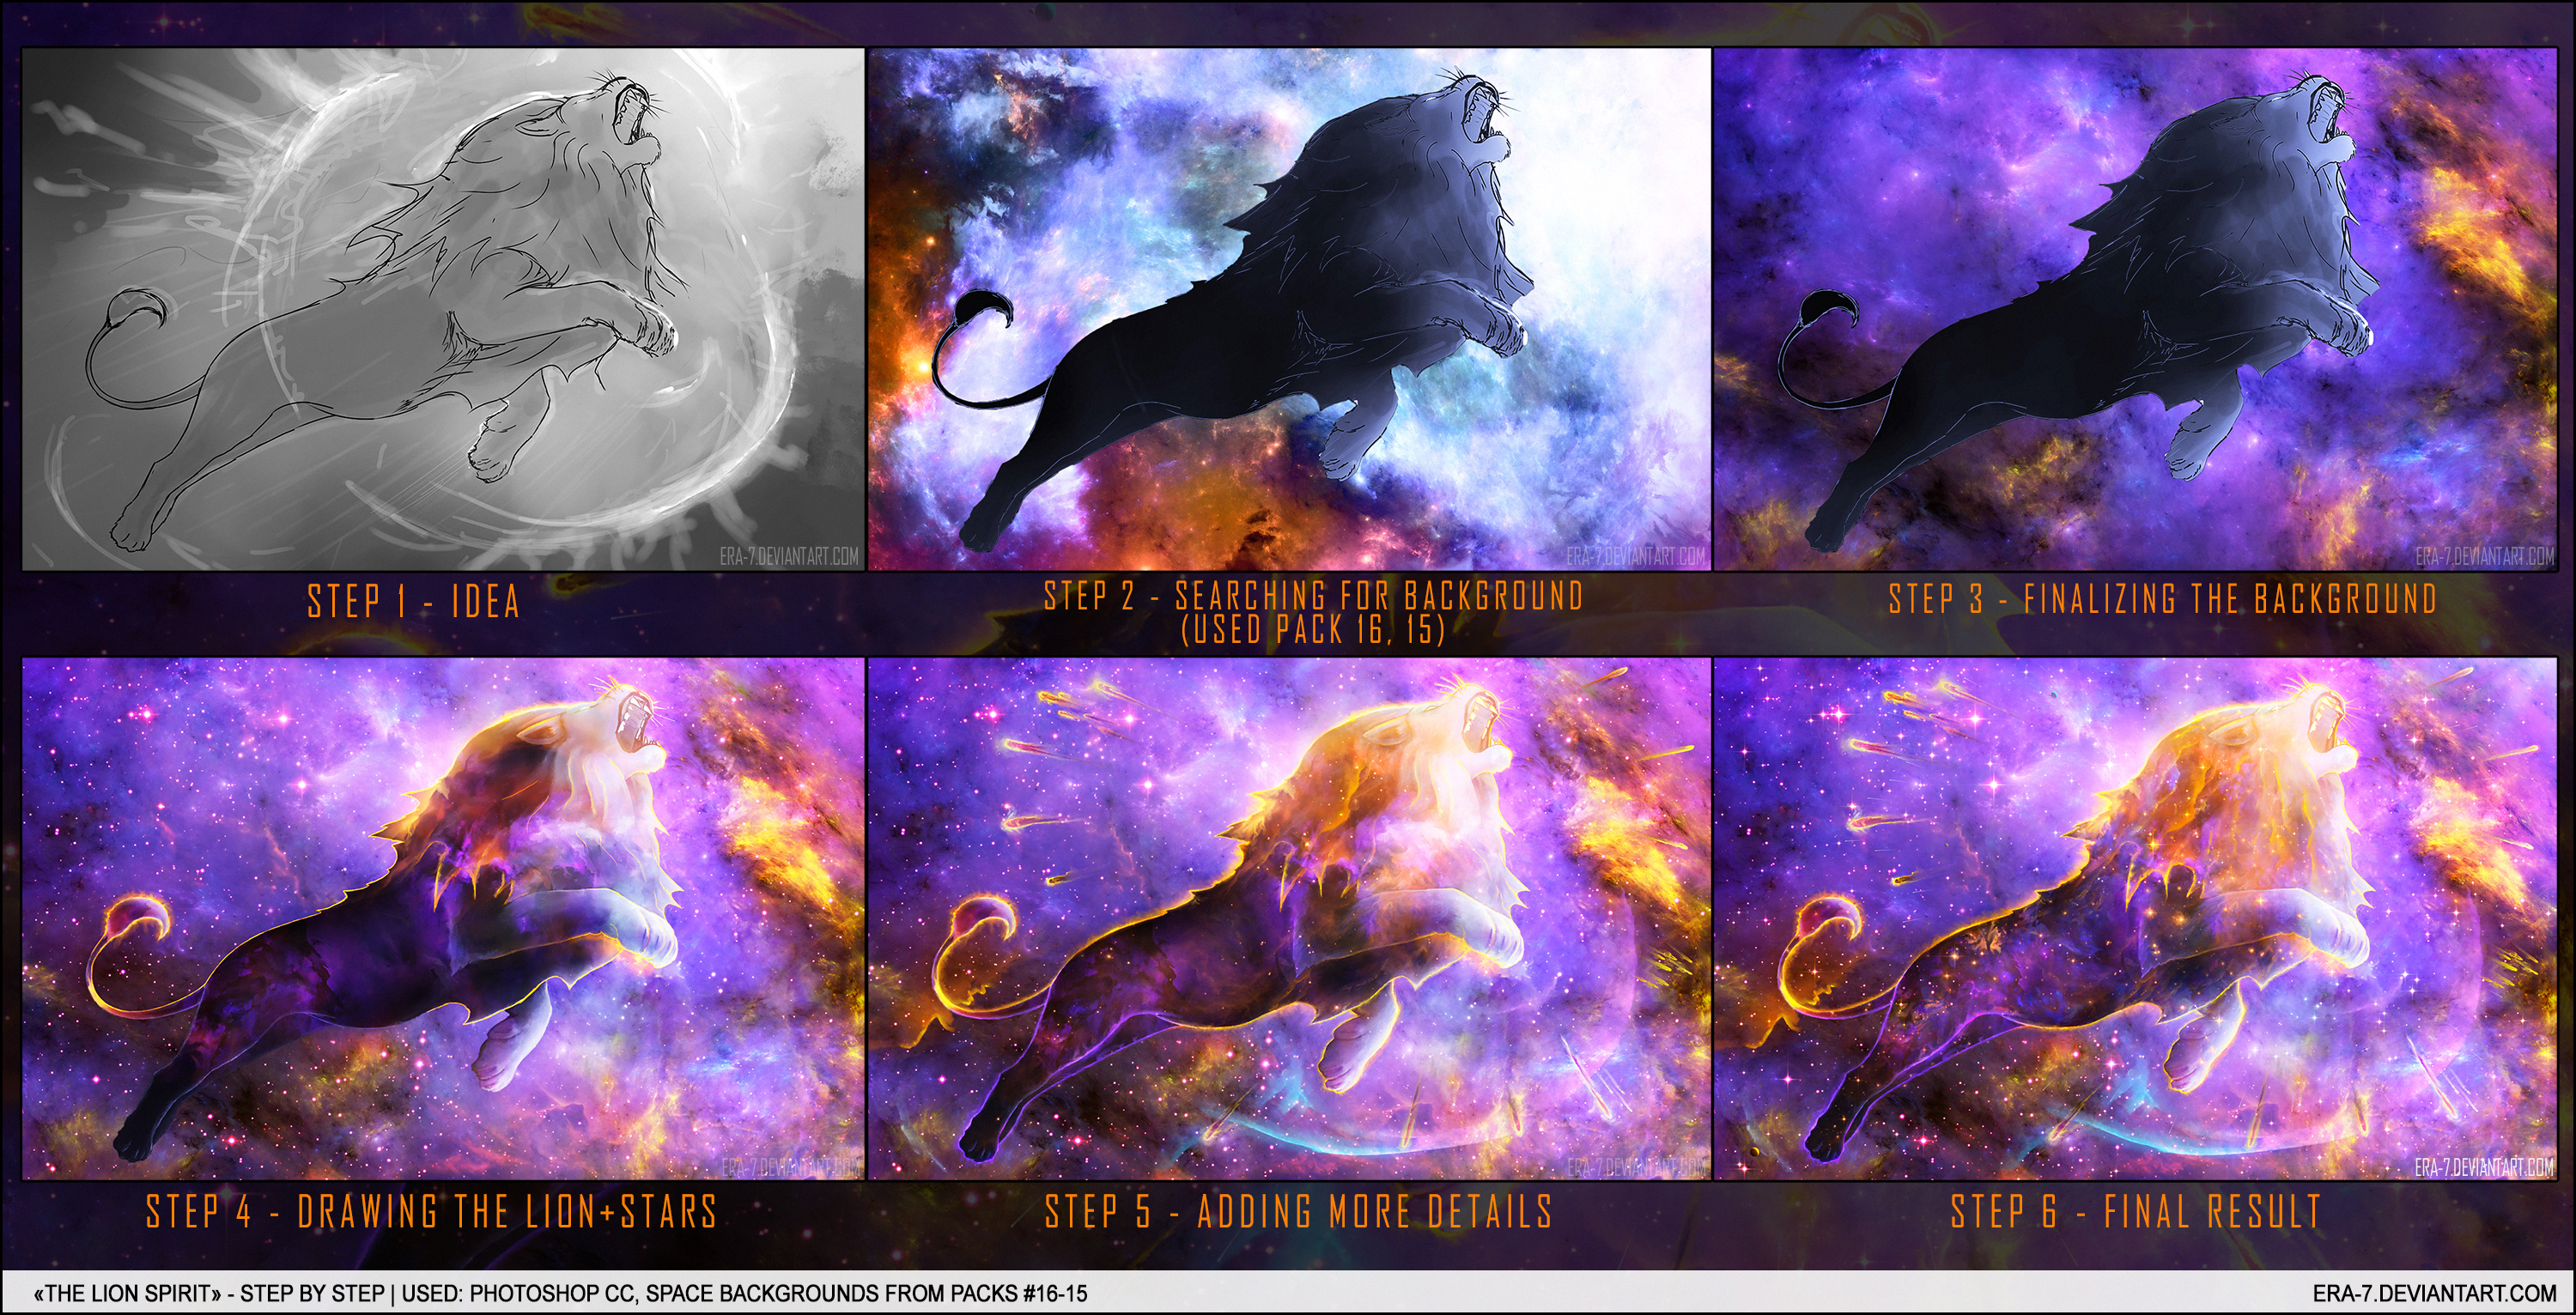 Colorful Lion Spirit In Space Nebula
 Wallpapers